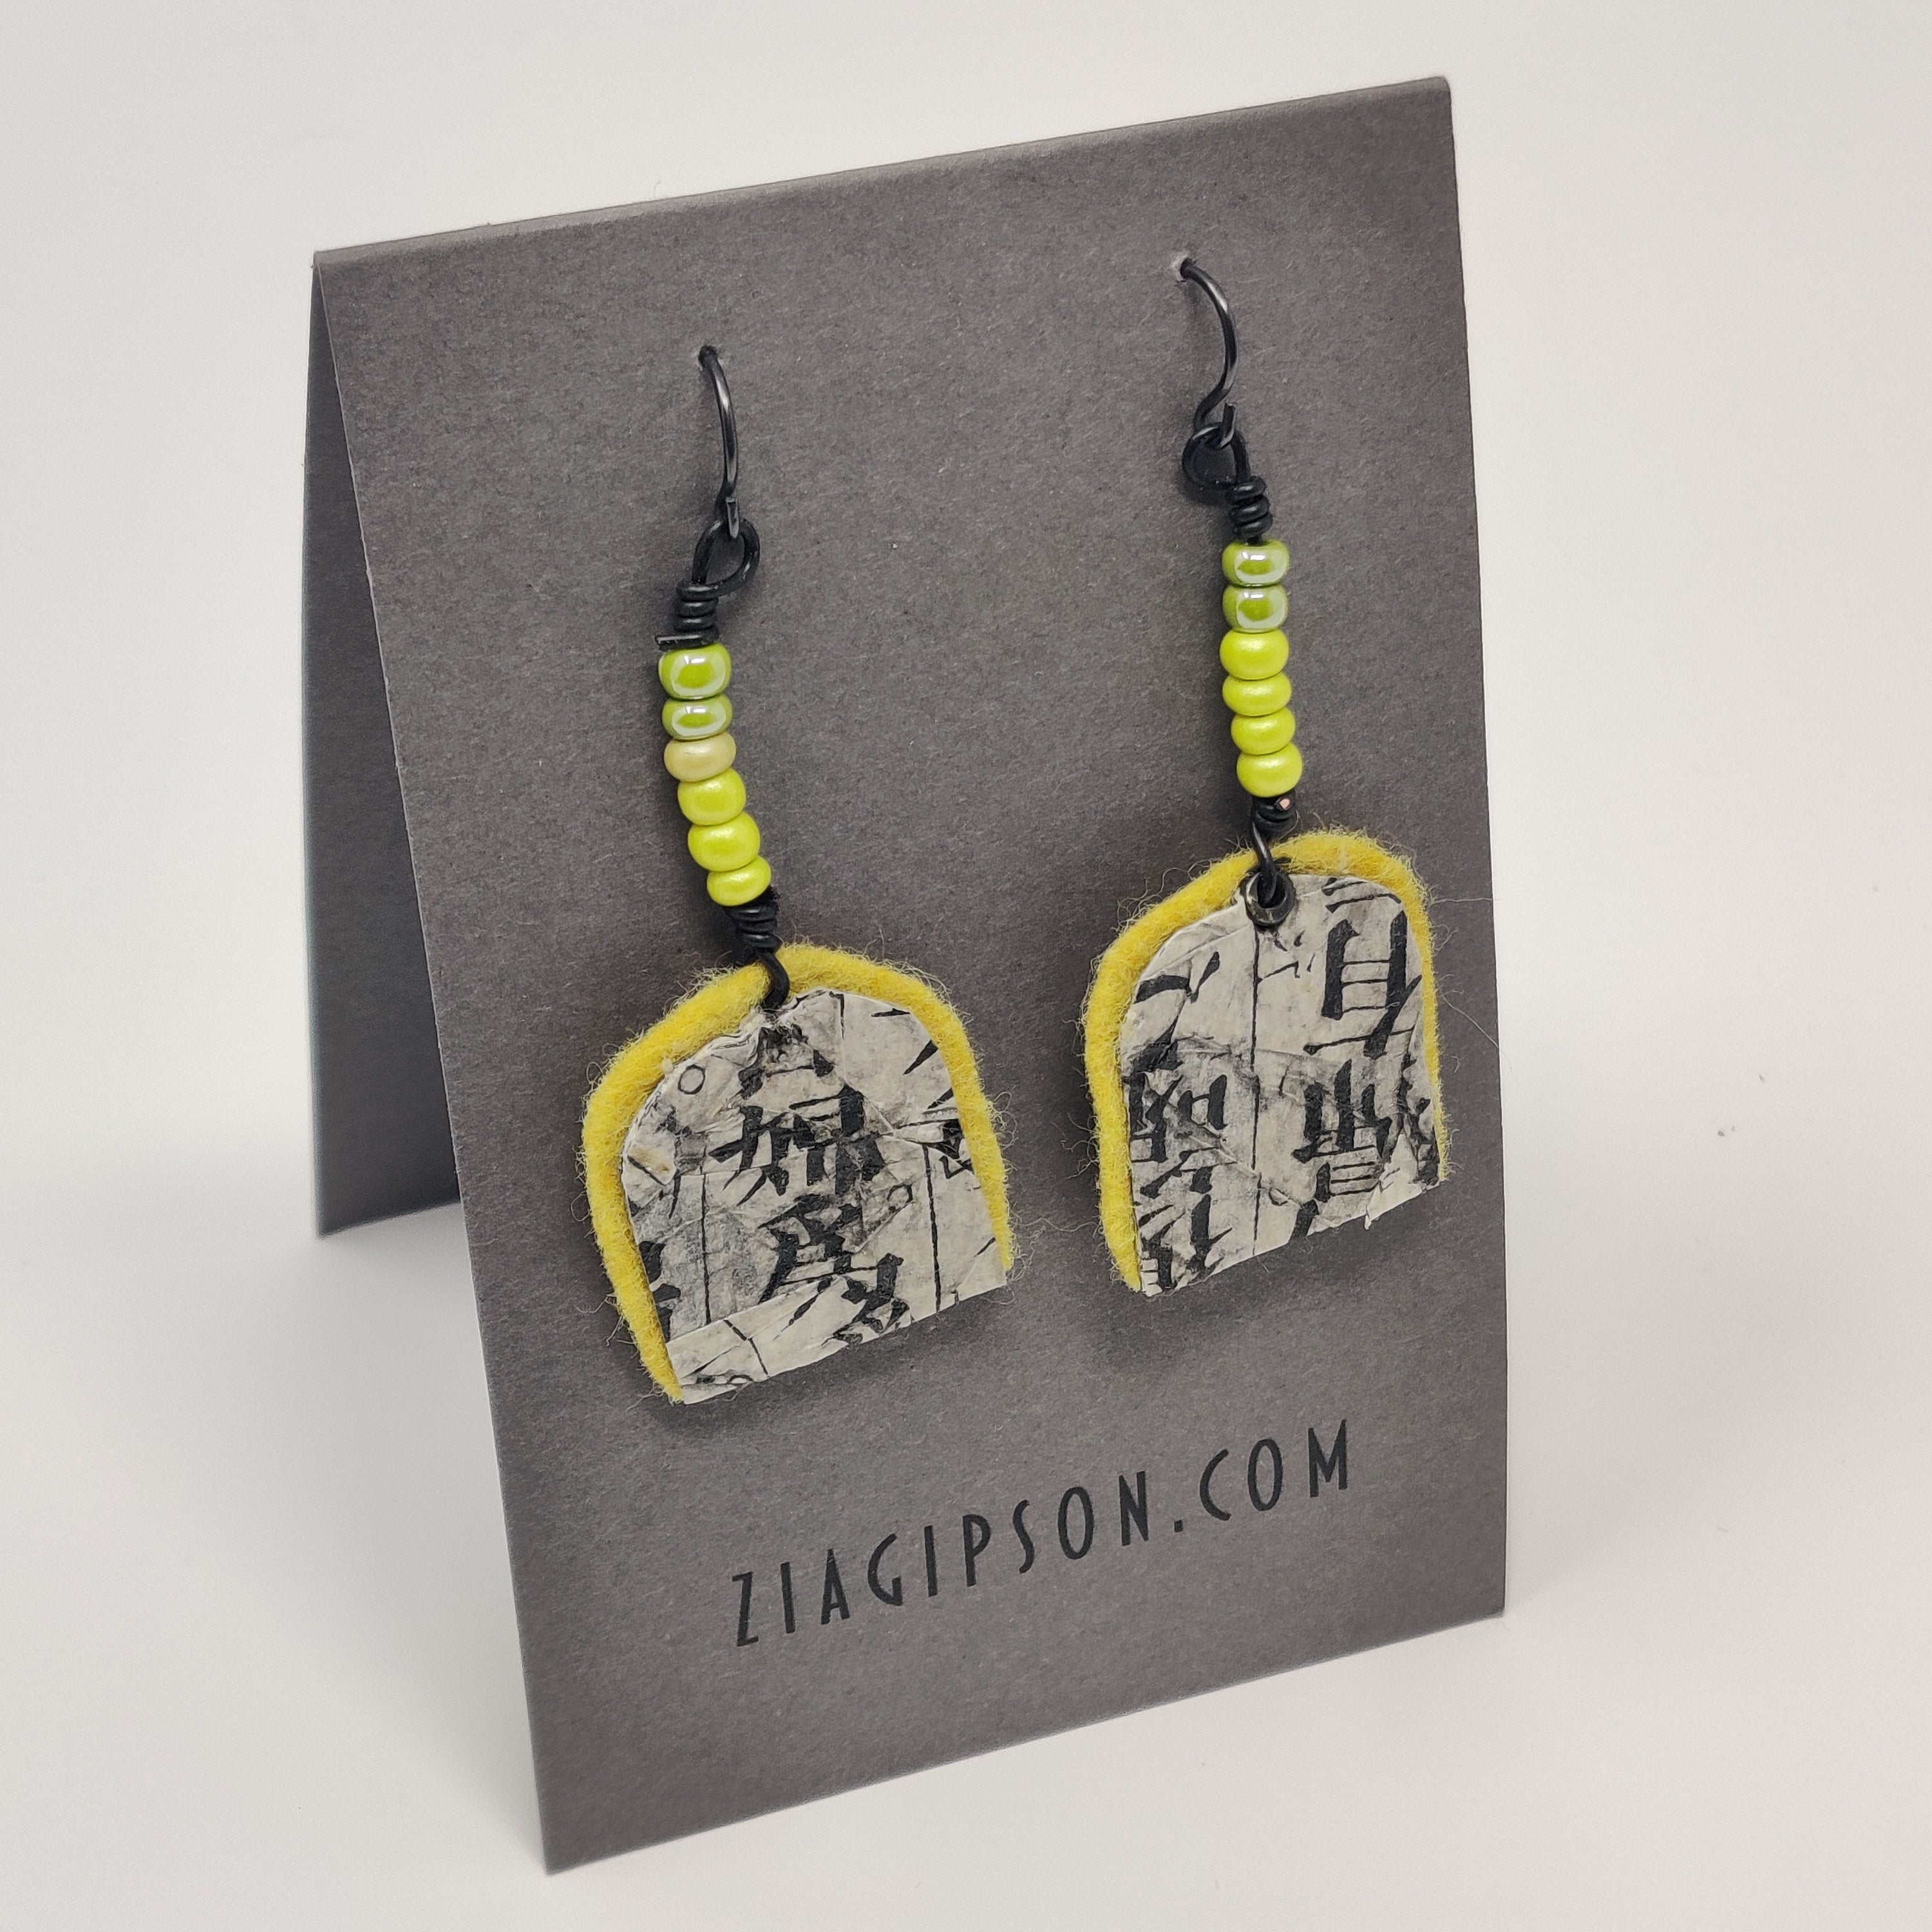 Black and Lime Earrings by Zia Gipson